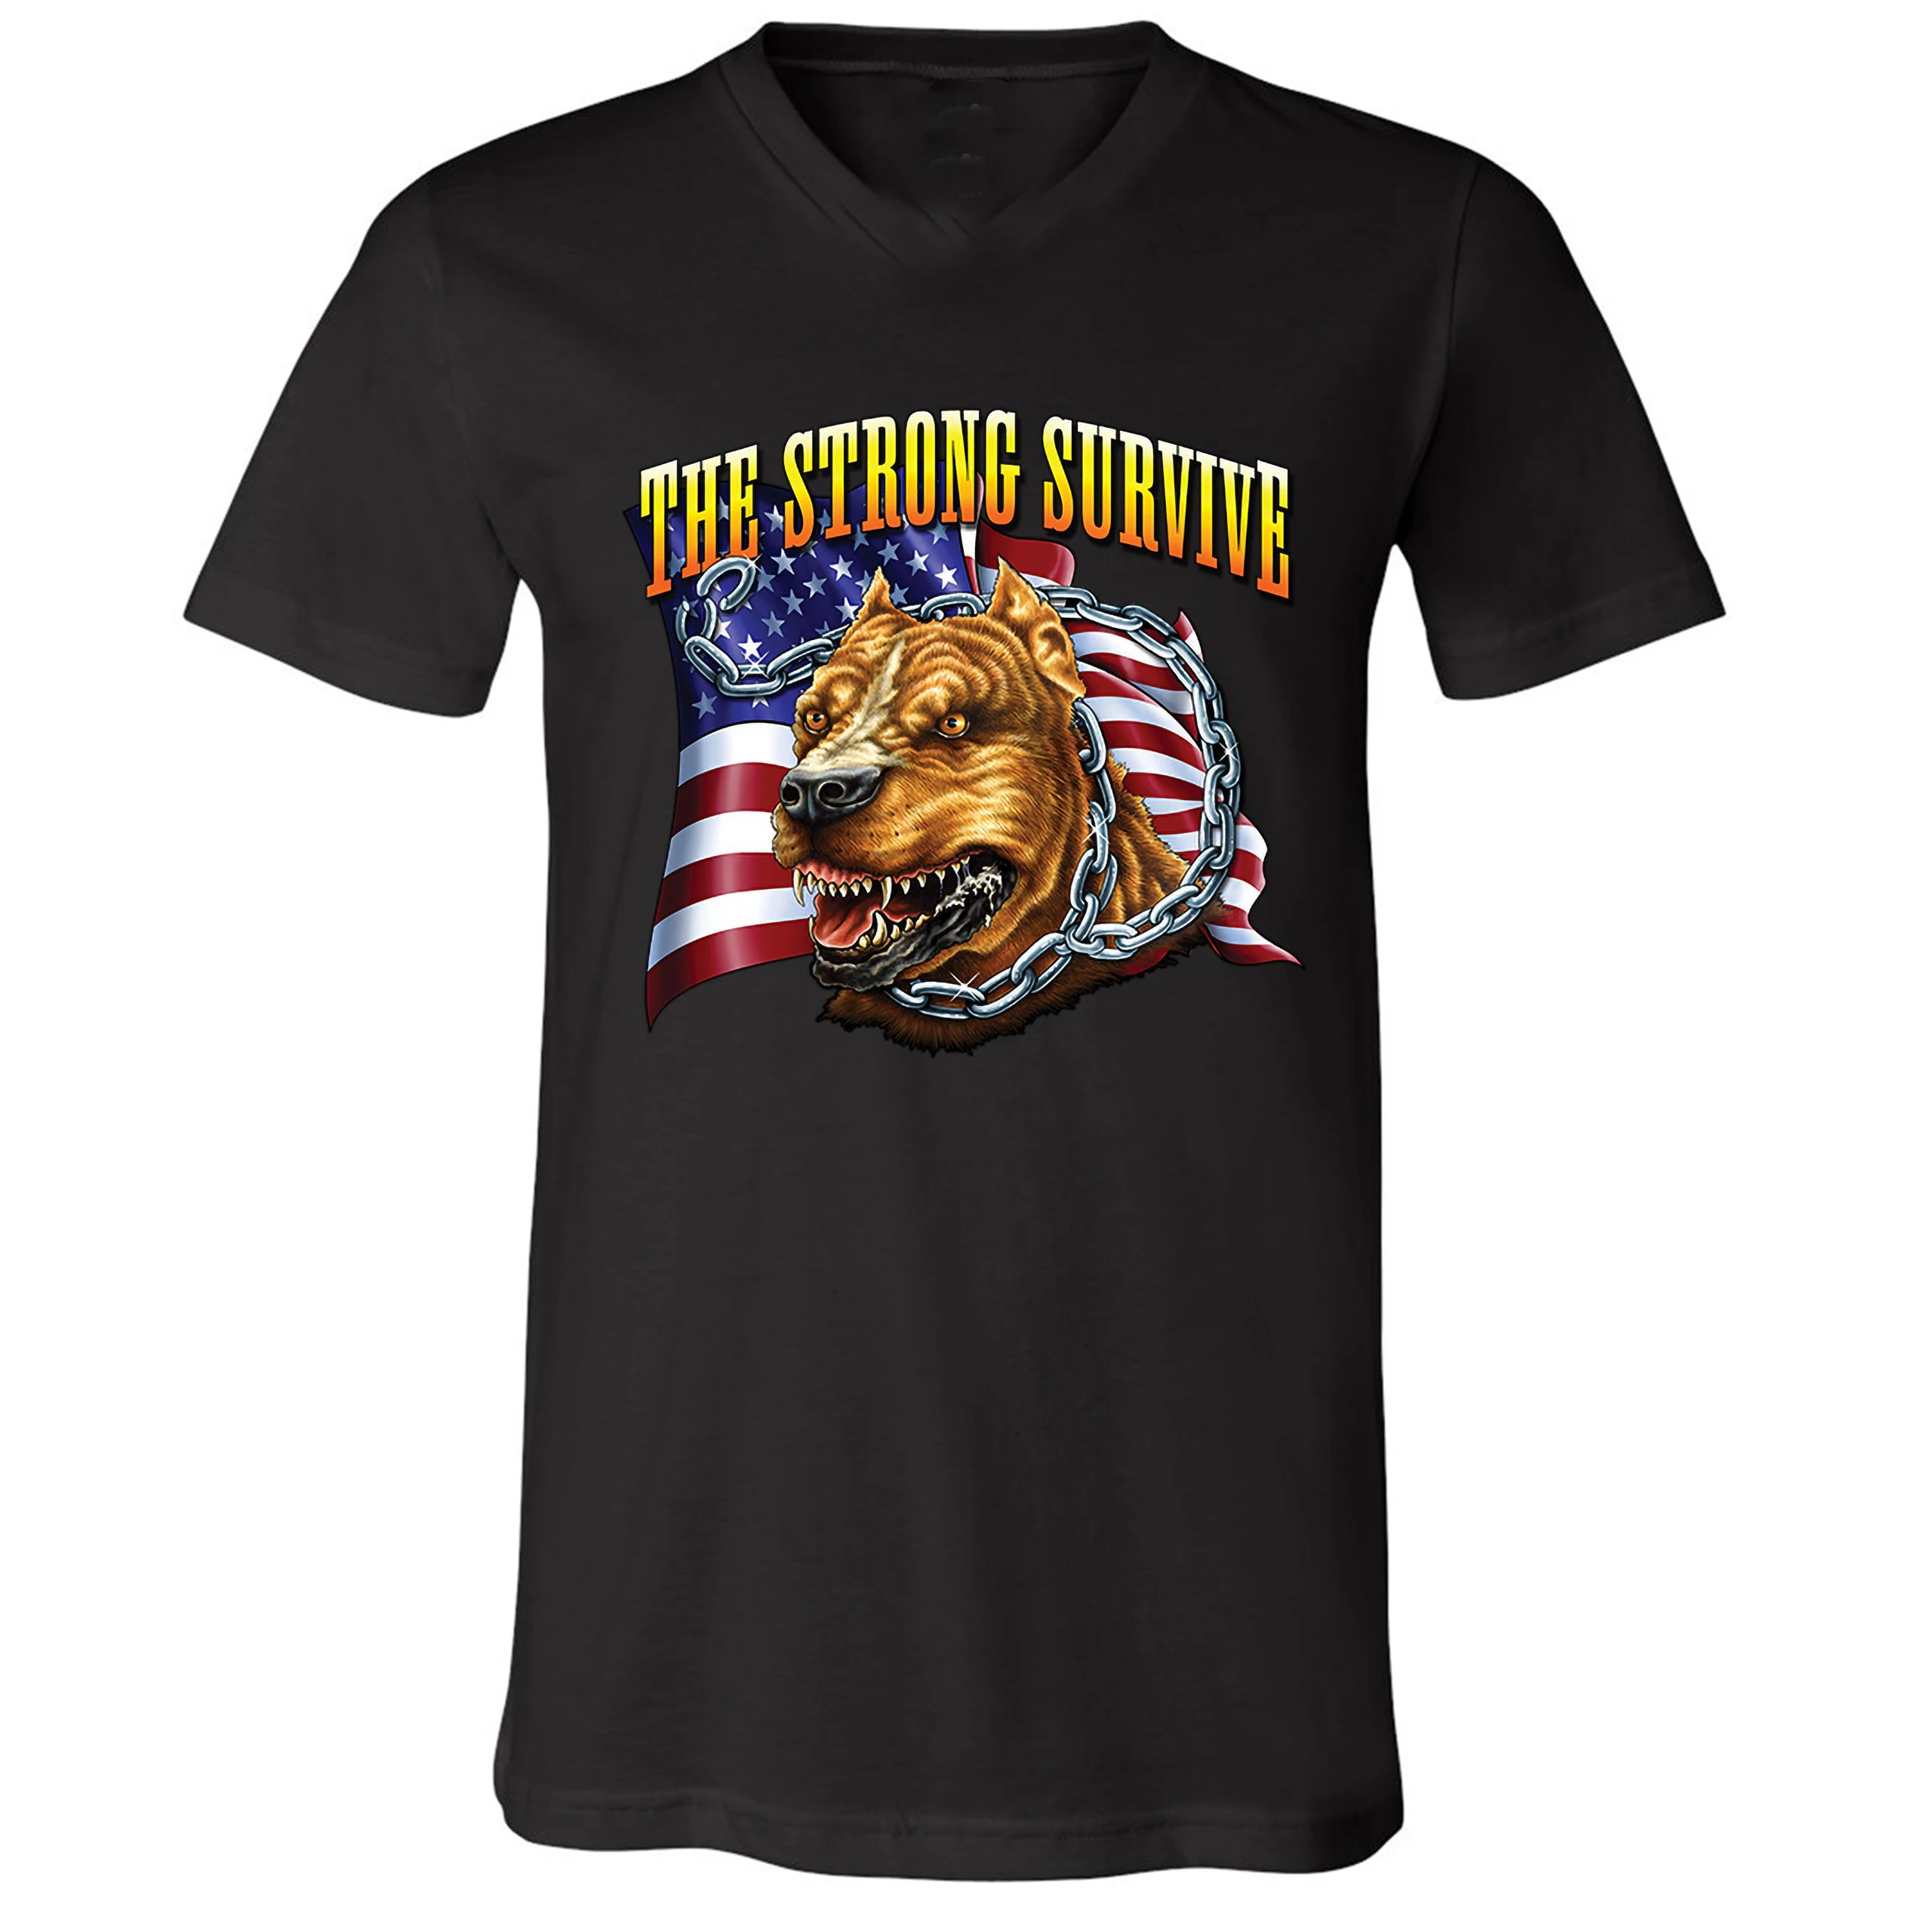 

The Strong Survive. American Flag Beastly Pit Bull Patriotic T-Shirt. Summer Cotton O-Neck Short Sleeve Mens T Shirt New S-3XL